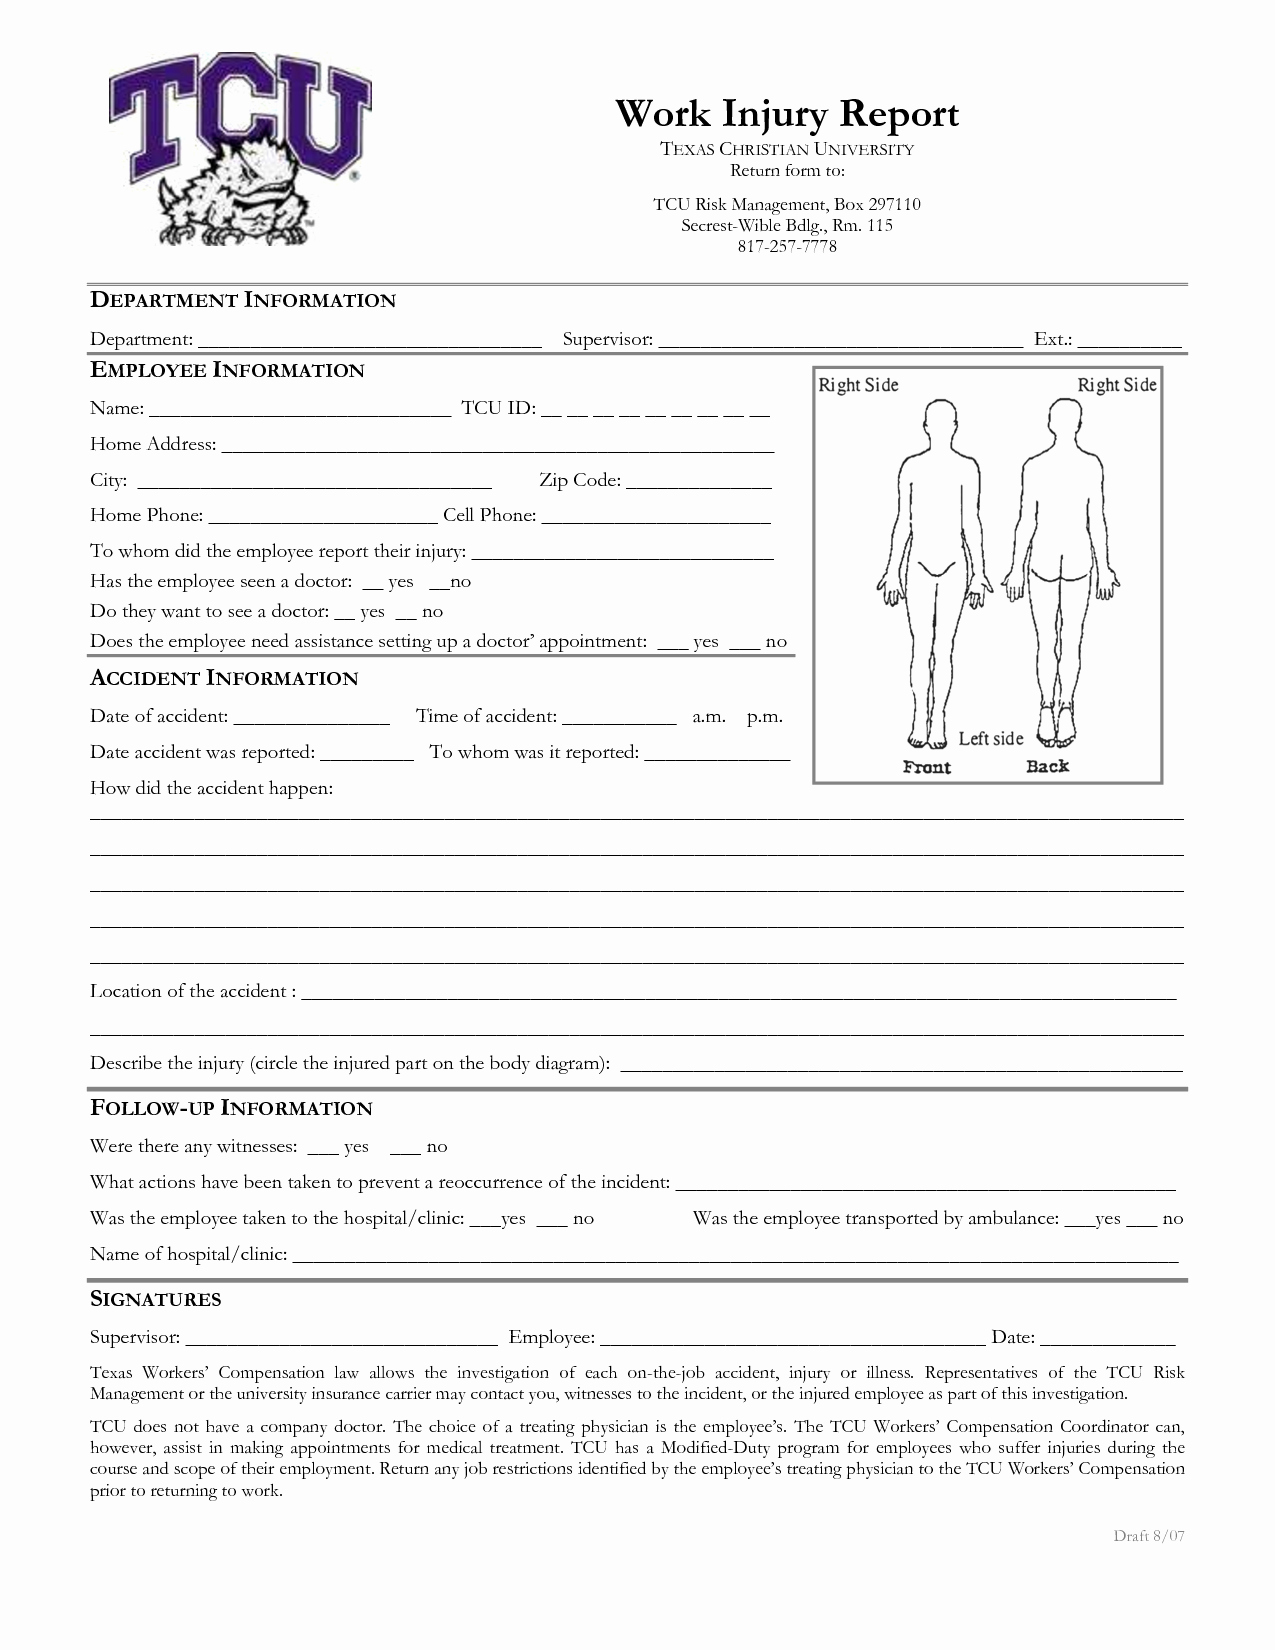 Employee Accident Report Template Beautiful Best S Of Employee Accident Report form Employee